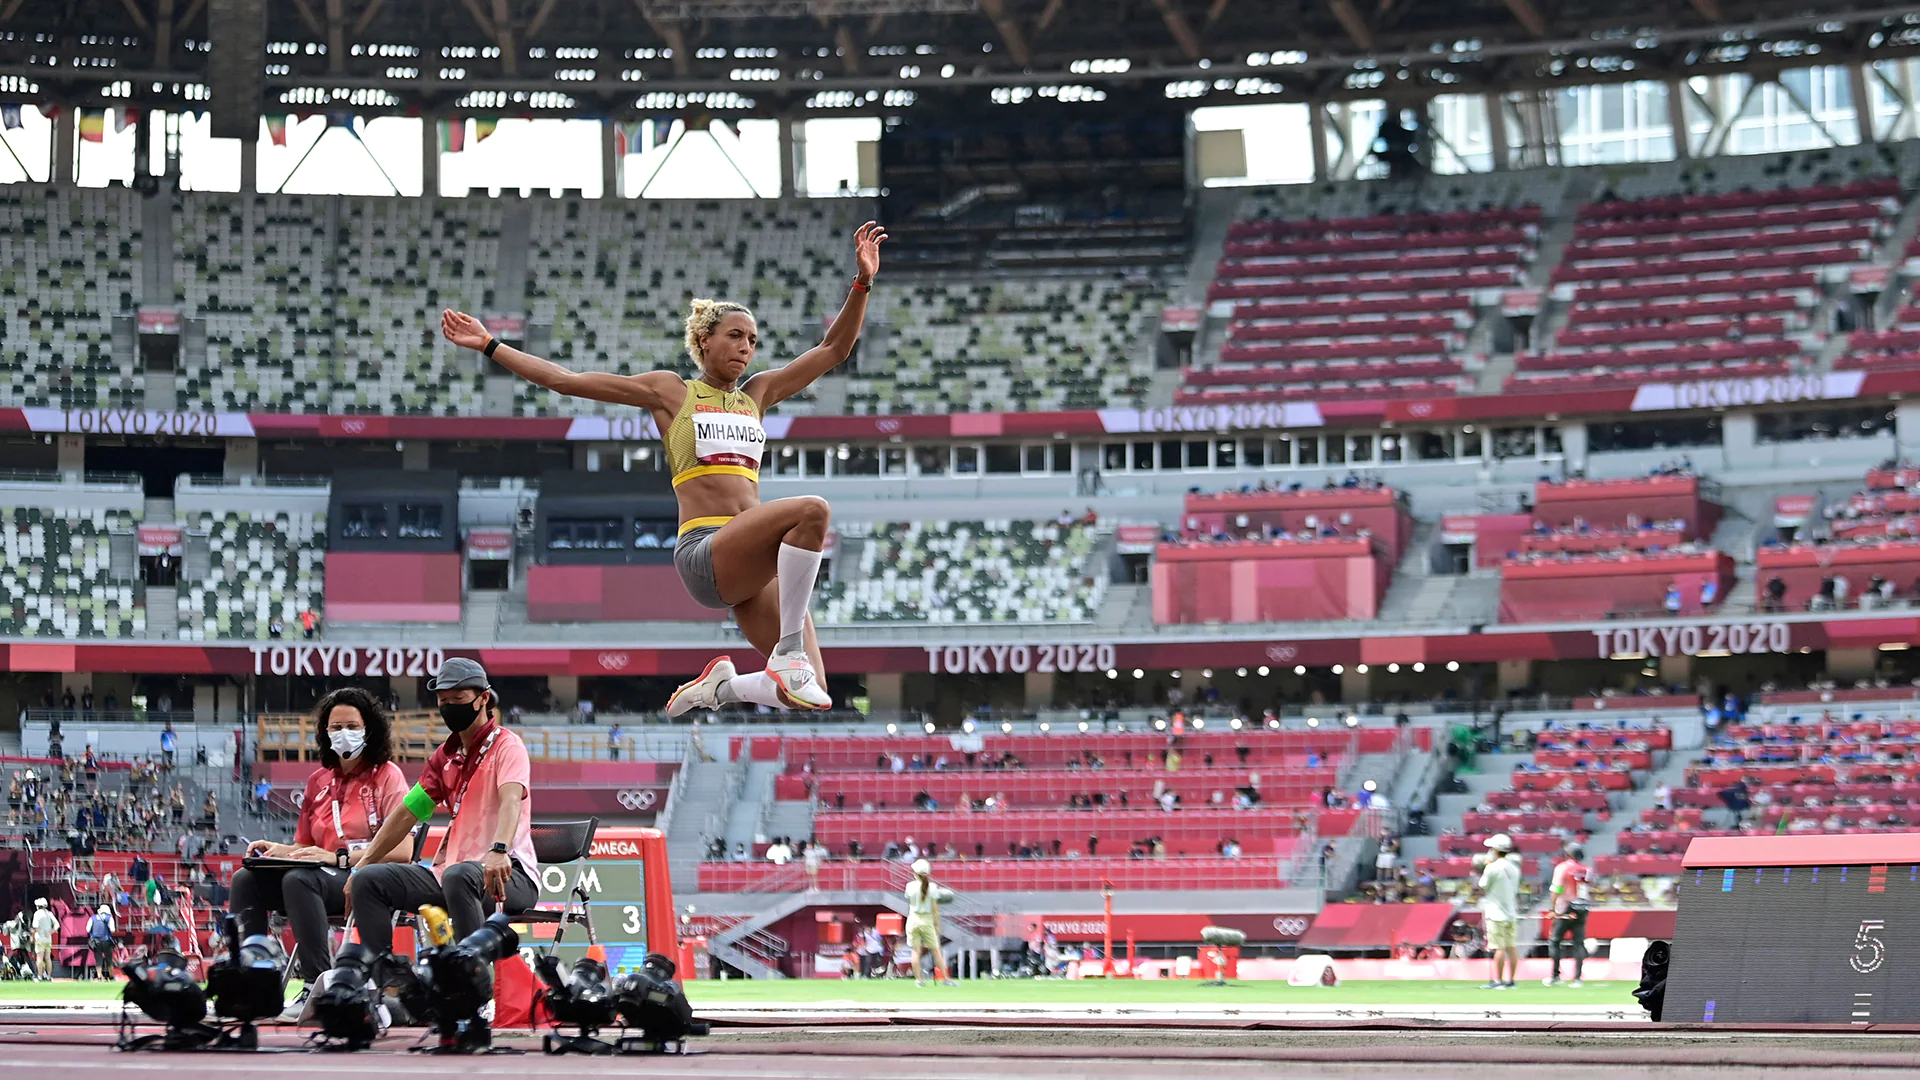 germany’s-mihambo-swipes-women’s-long-jump-gold-on-final-leap;-usa’s-reese-takes-silver-–-nbc-olympics